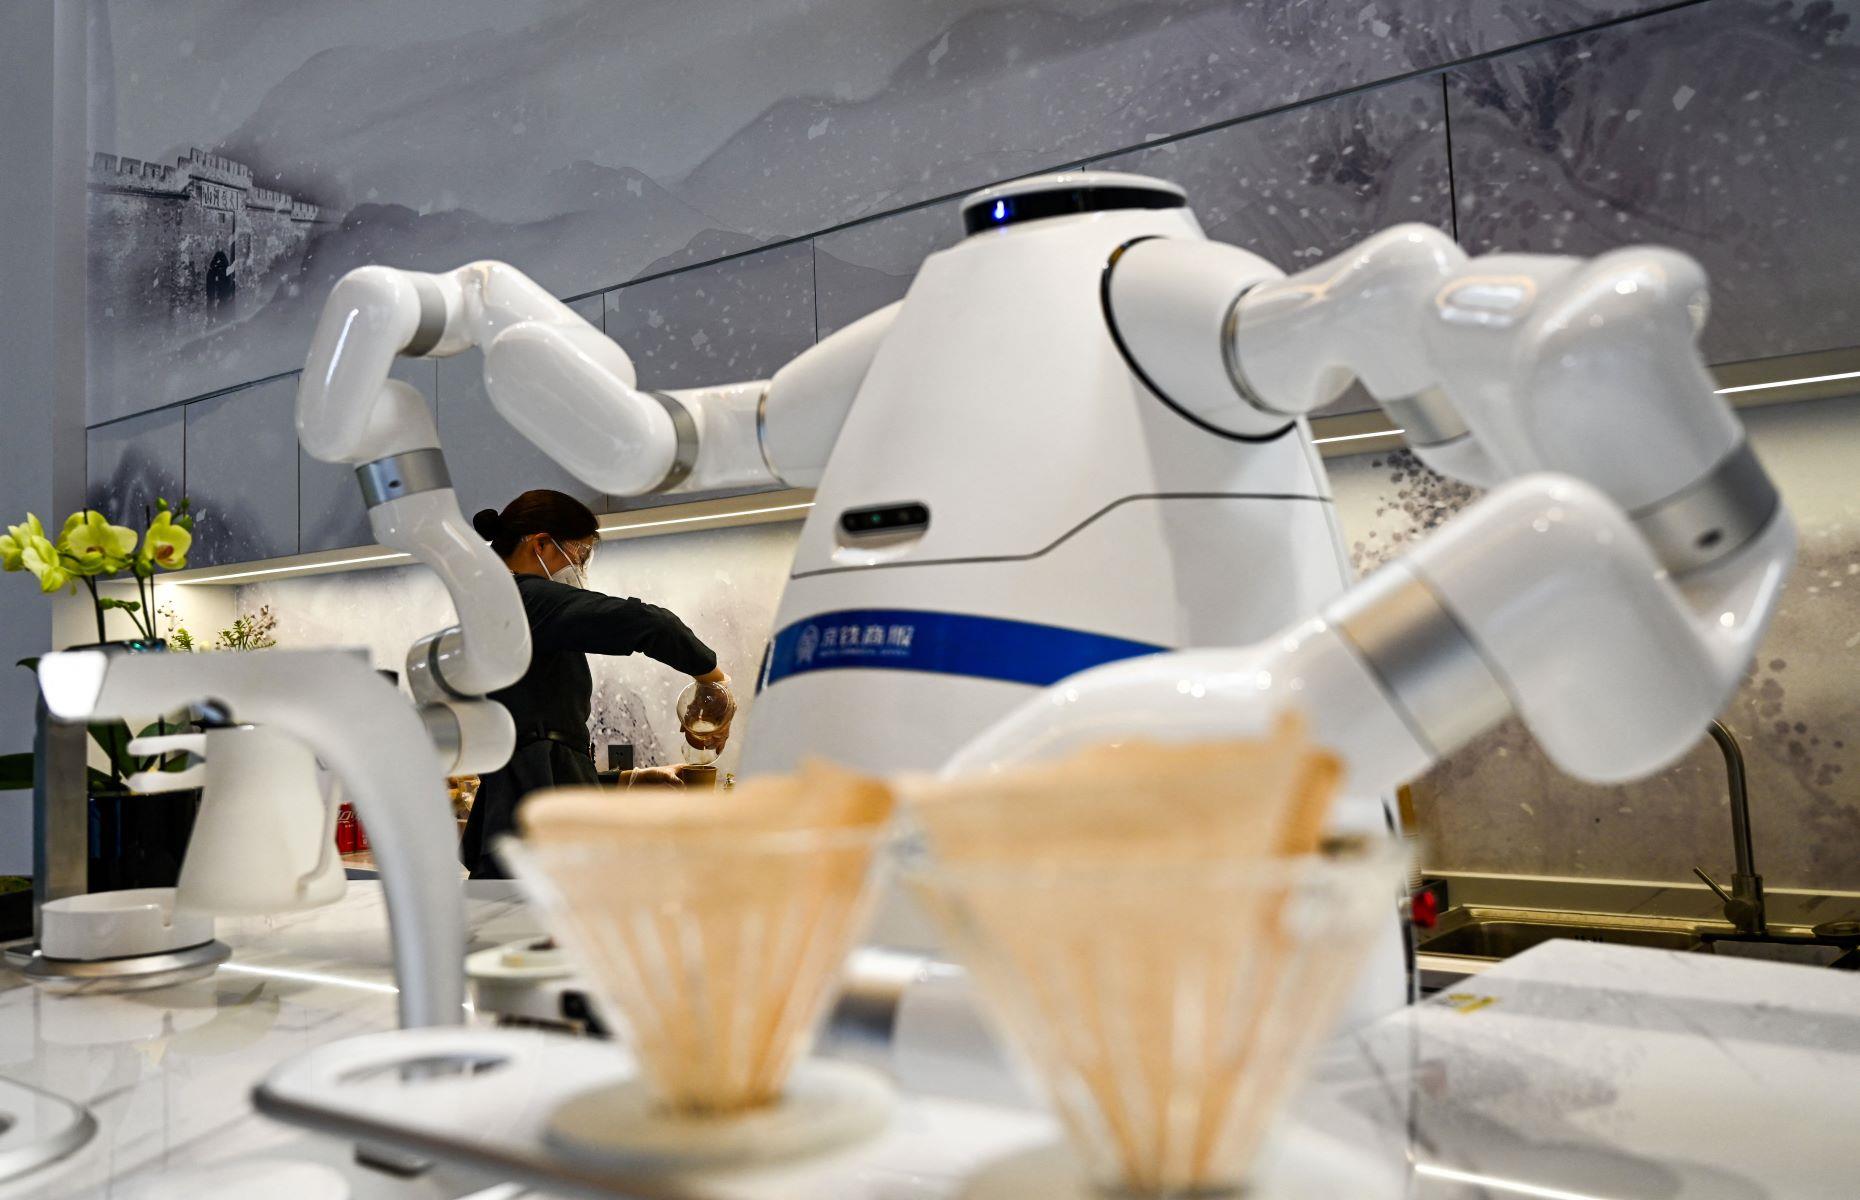 <p>How do you take your coffee? At Taizicheng Railway Station in Zhangjiakou, a terminal just over a mile from Beijing's Olympic Village, it's served by an unusual barista. From grinding the beans to cleaning up afterwards, this clever robot can carry out the whole coffee-making process in around five minutes.</p>  <p>You don't even need to order at the counter; simply use your phone to scan the QR code for the drink you want and wait while technology takes care of the rest. </p>